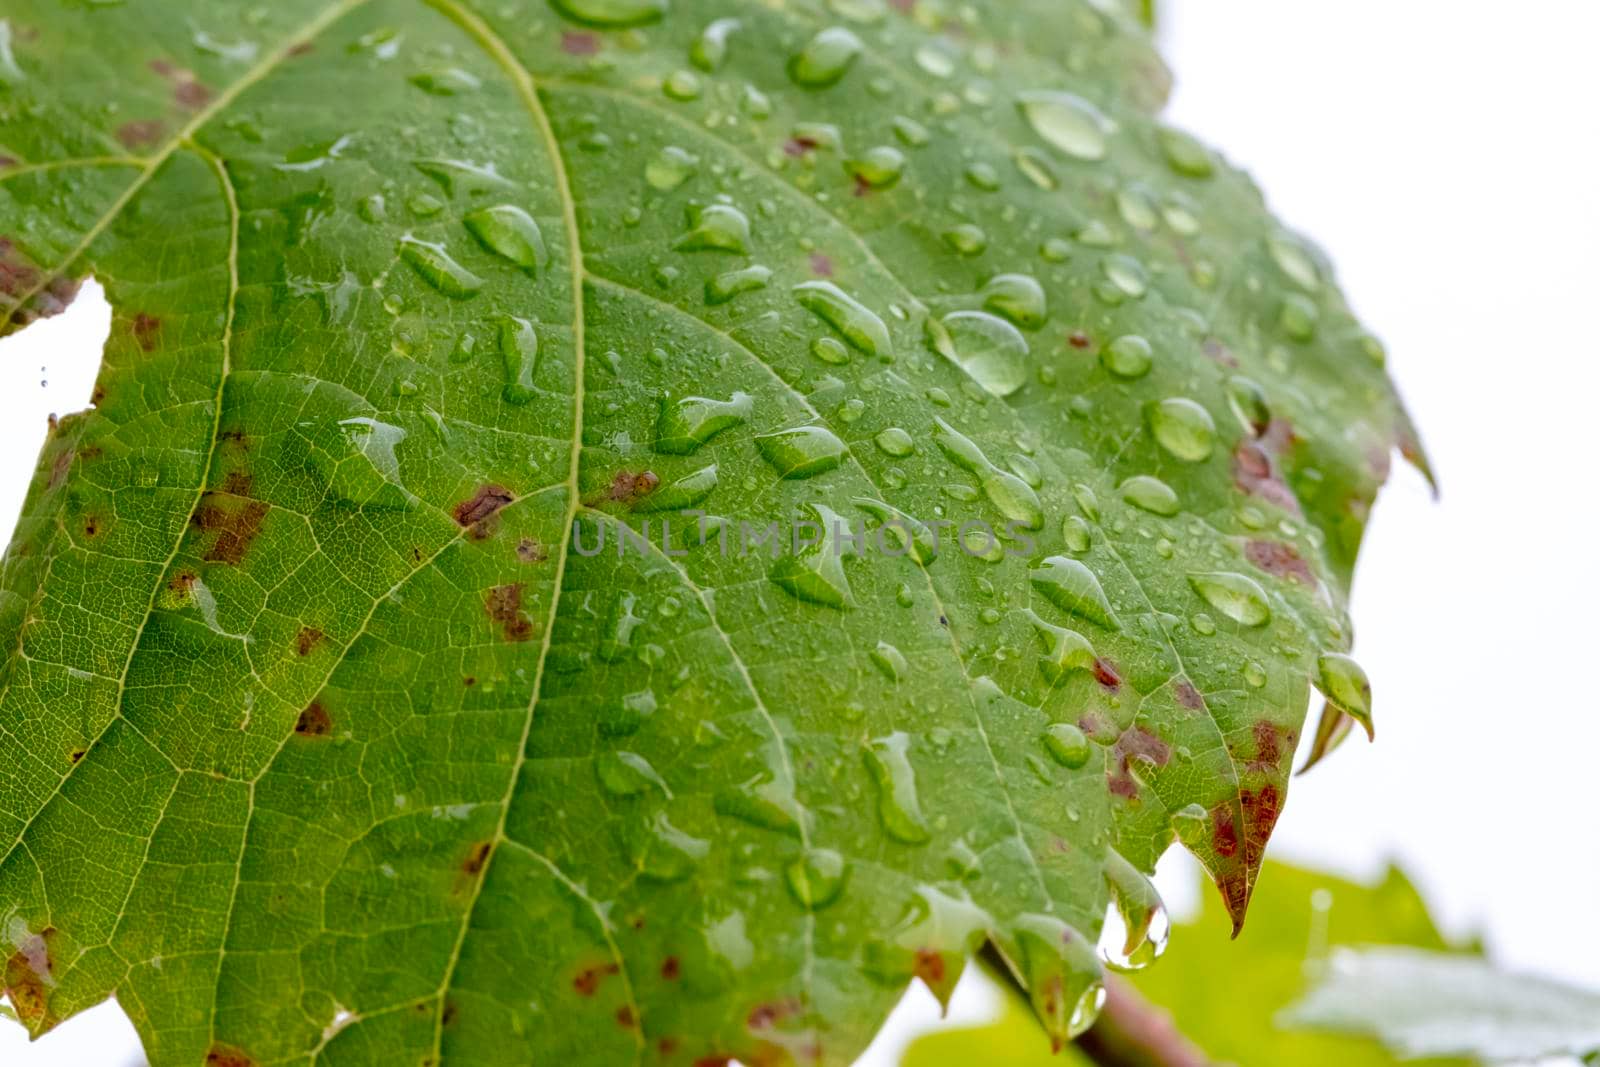 Waterdrops on a large green leaf by WittkePhotos